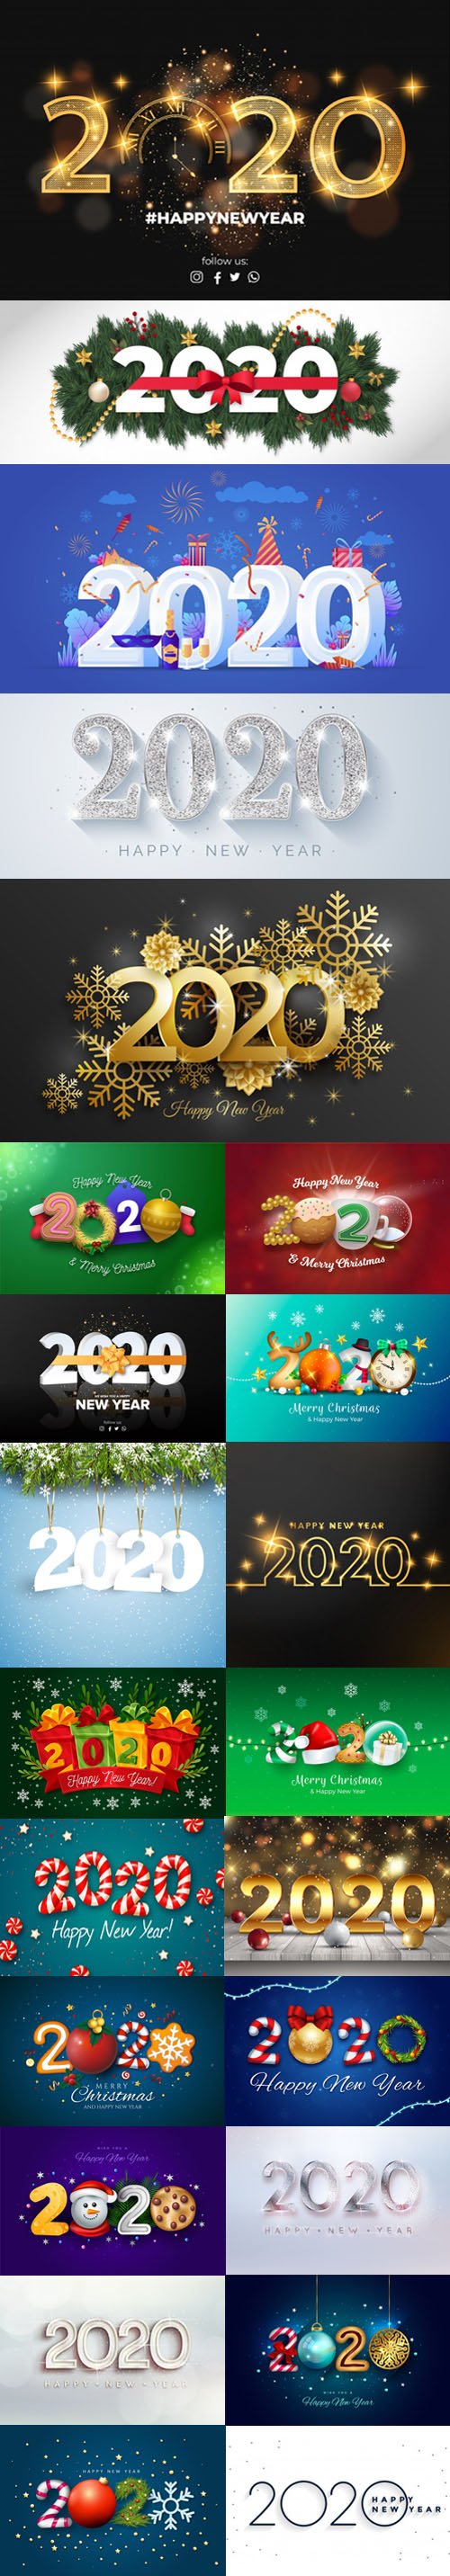 23 New Year 2020 Backgrounds Vector Collection 3